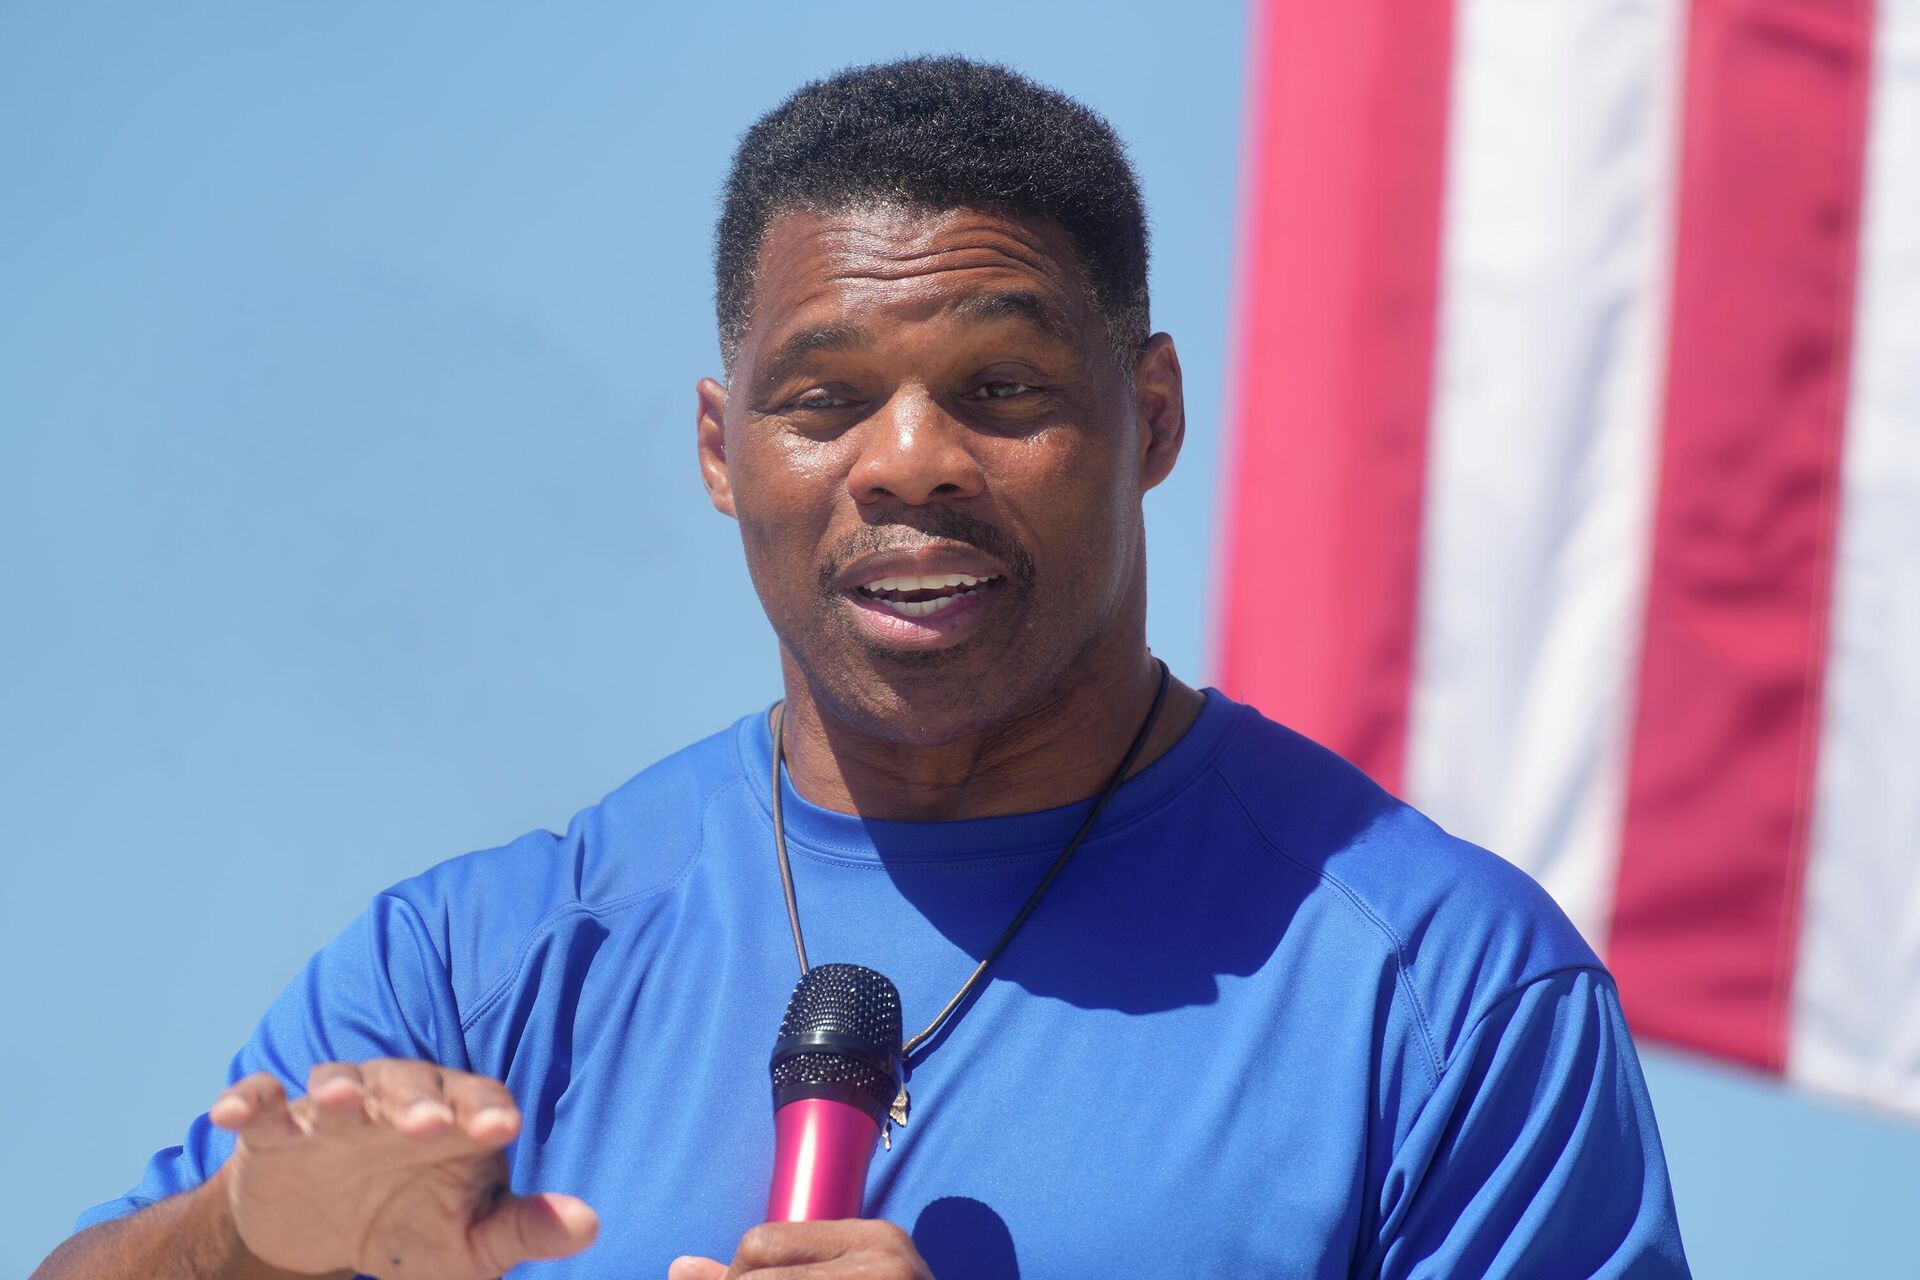 Georgia GOP Senate nominee Herschel Walker smiles during remarks during a campaign stop at Battle Lumber Co. on Thursday, Oct. 6, 2022, in Wadley, Ga. Walker's appearance was his first following reports that a woman who said Walker paid for her 2009 abortion is actually mother of one of his children - undercutting Walker's claims he didn't know who she was. - Sputnik International, 1920, 06.12.2022